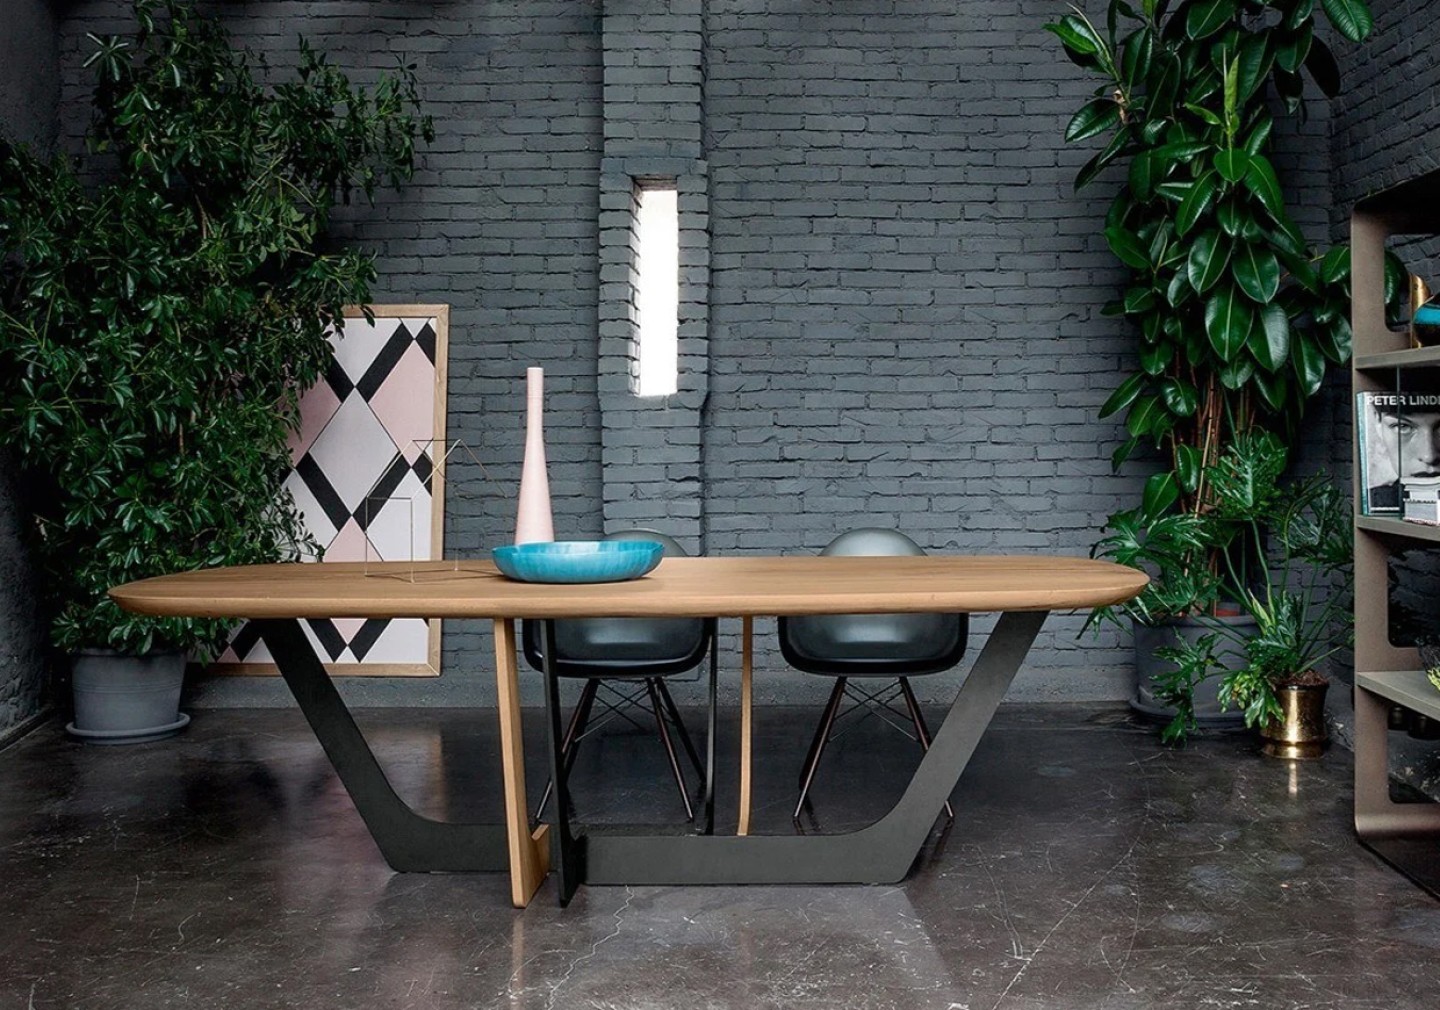 THE COSMOPOLITAN FREE DINING TABLE BY DEVINA NAIS